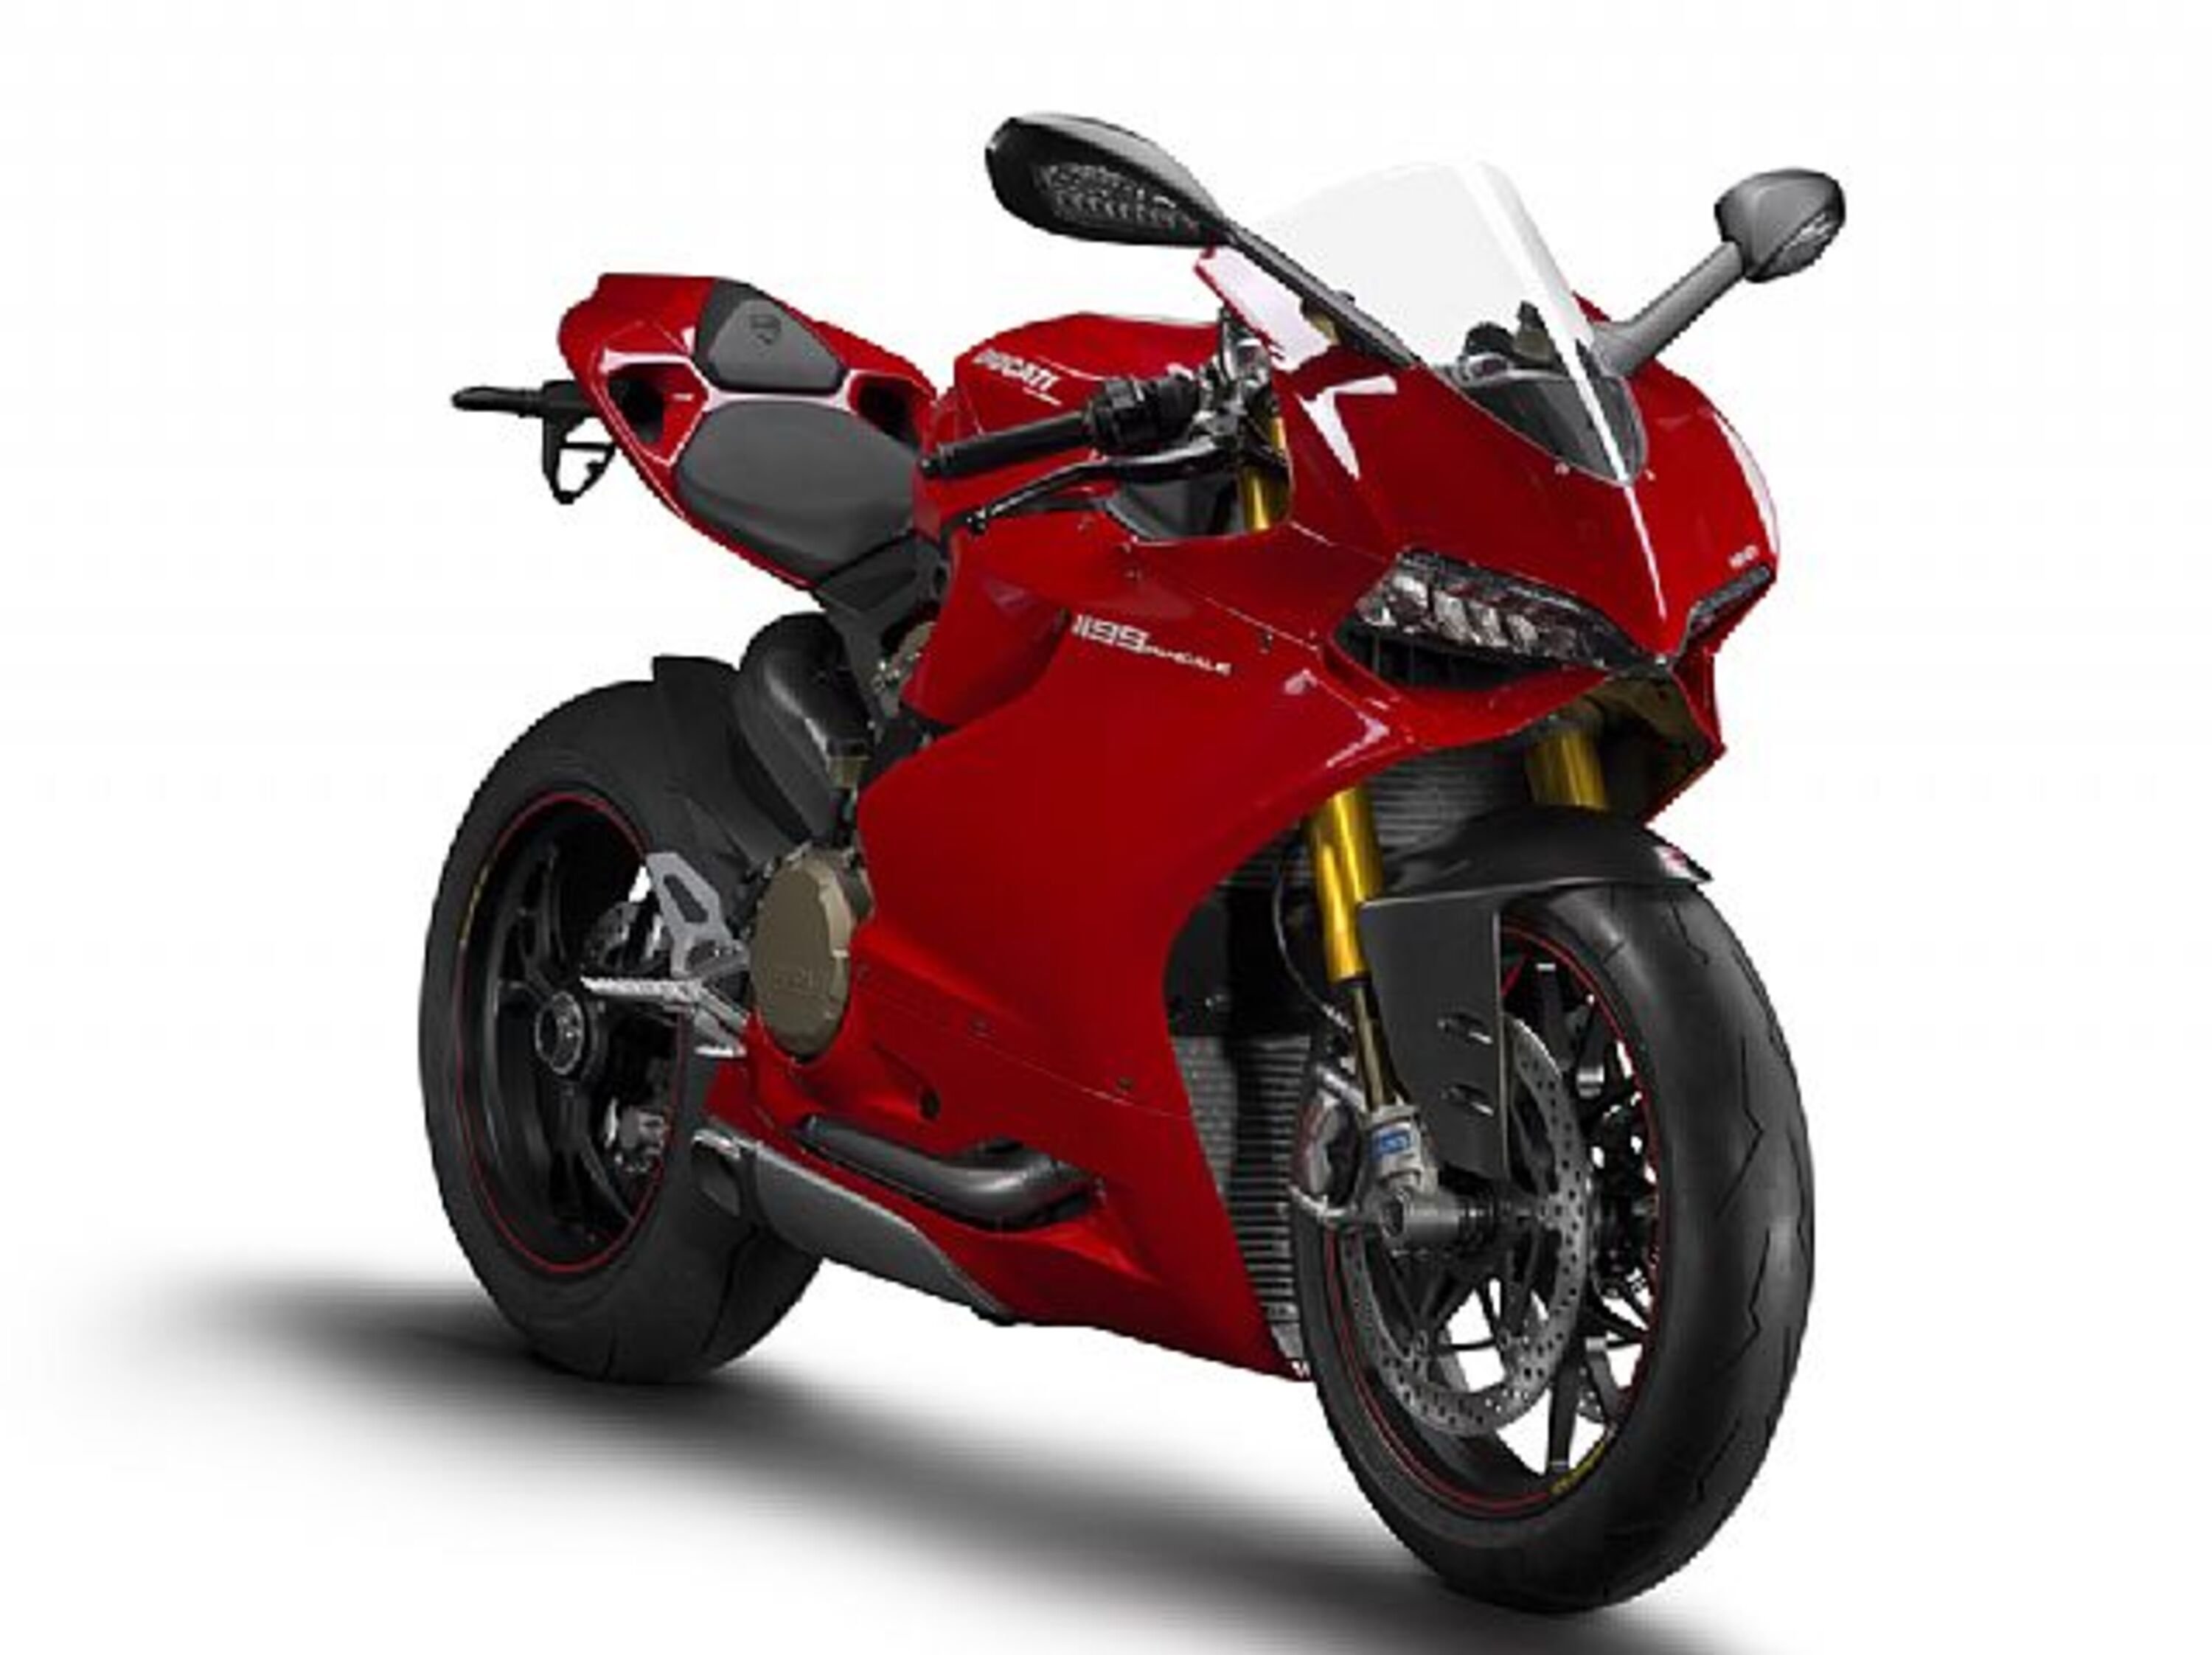 Ducati 1199 Panigale 1199 Panigale S (2013 - 14)